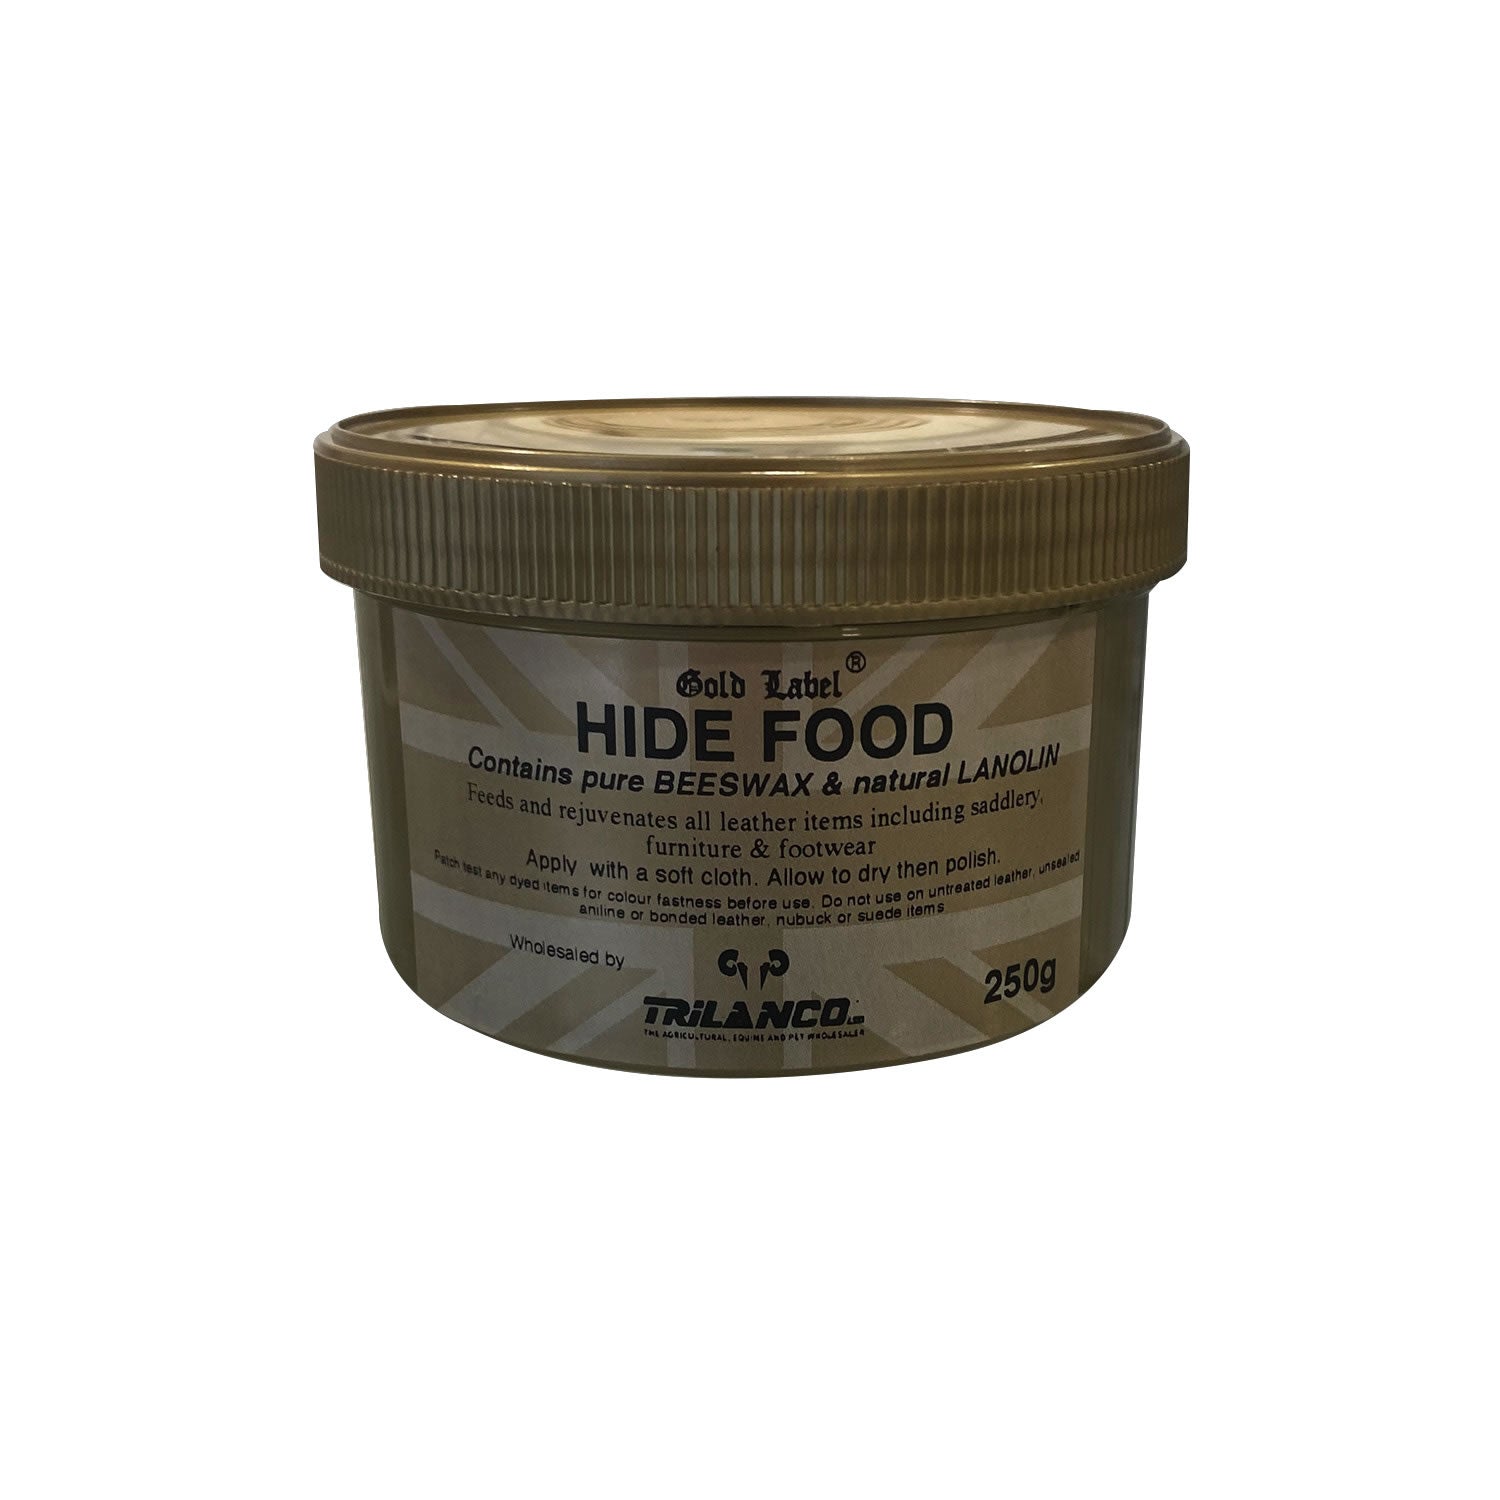 Gold Label Hide Food For Leather Items- 250g